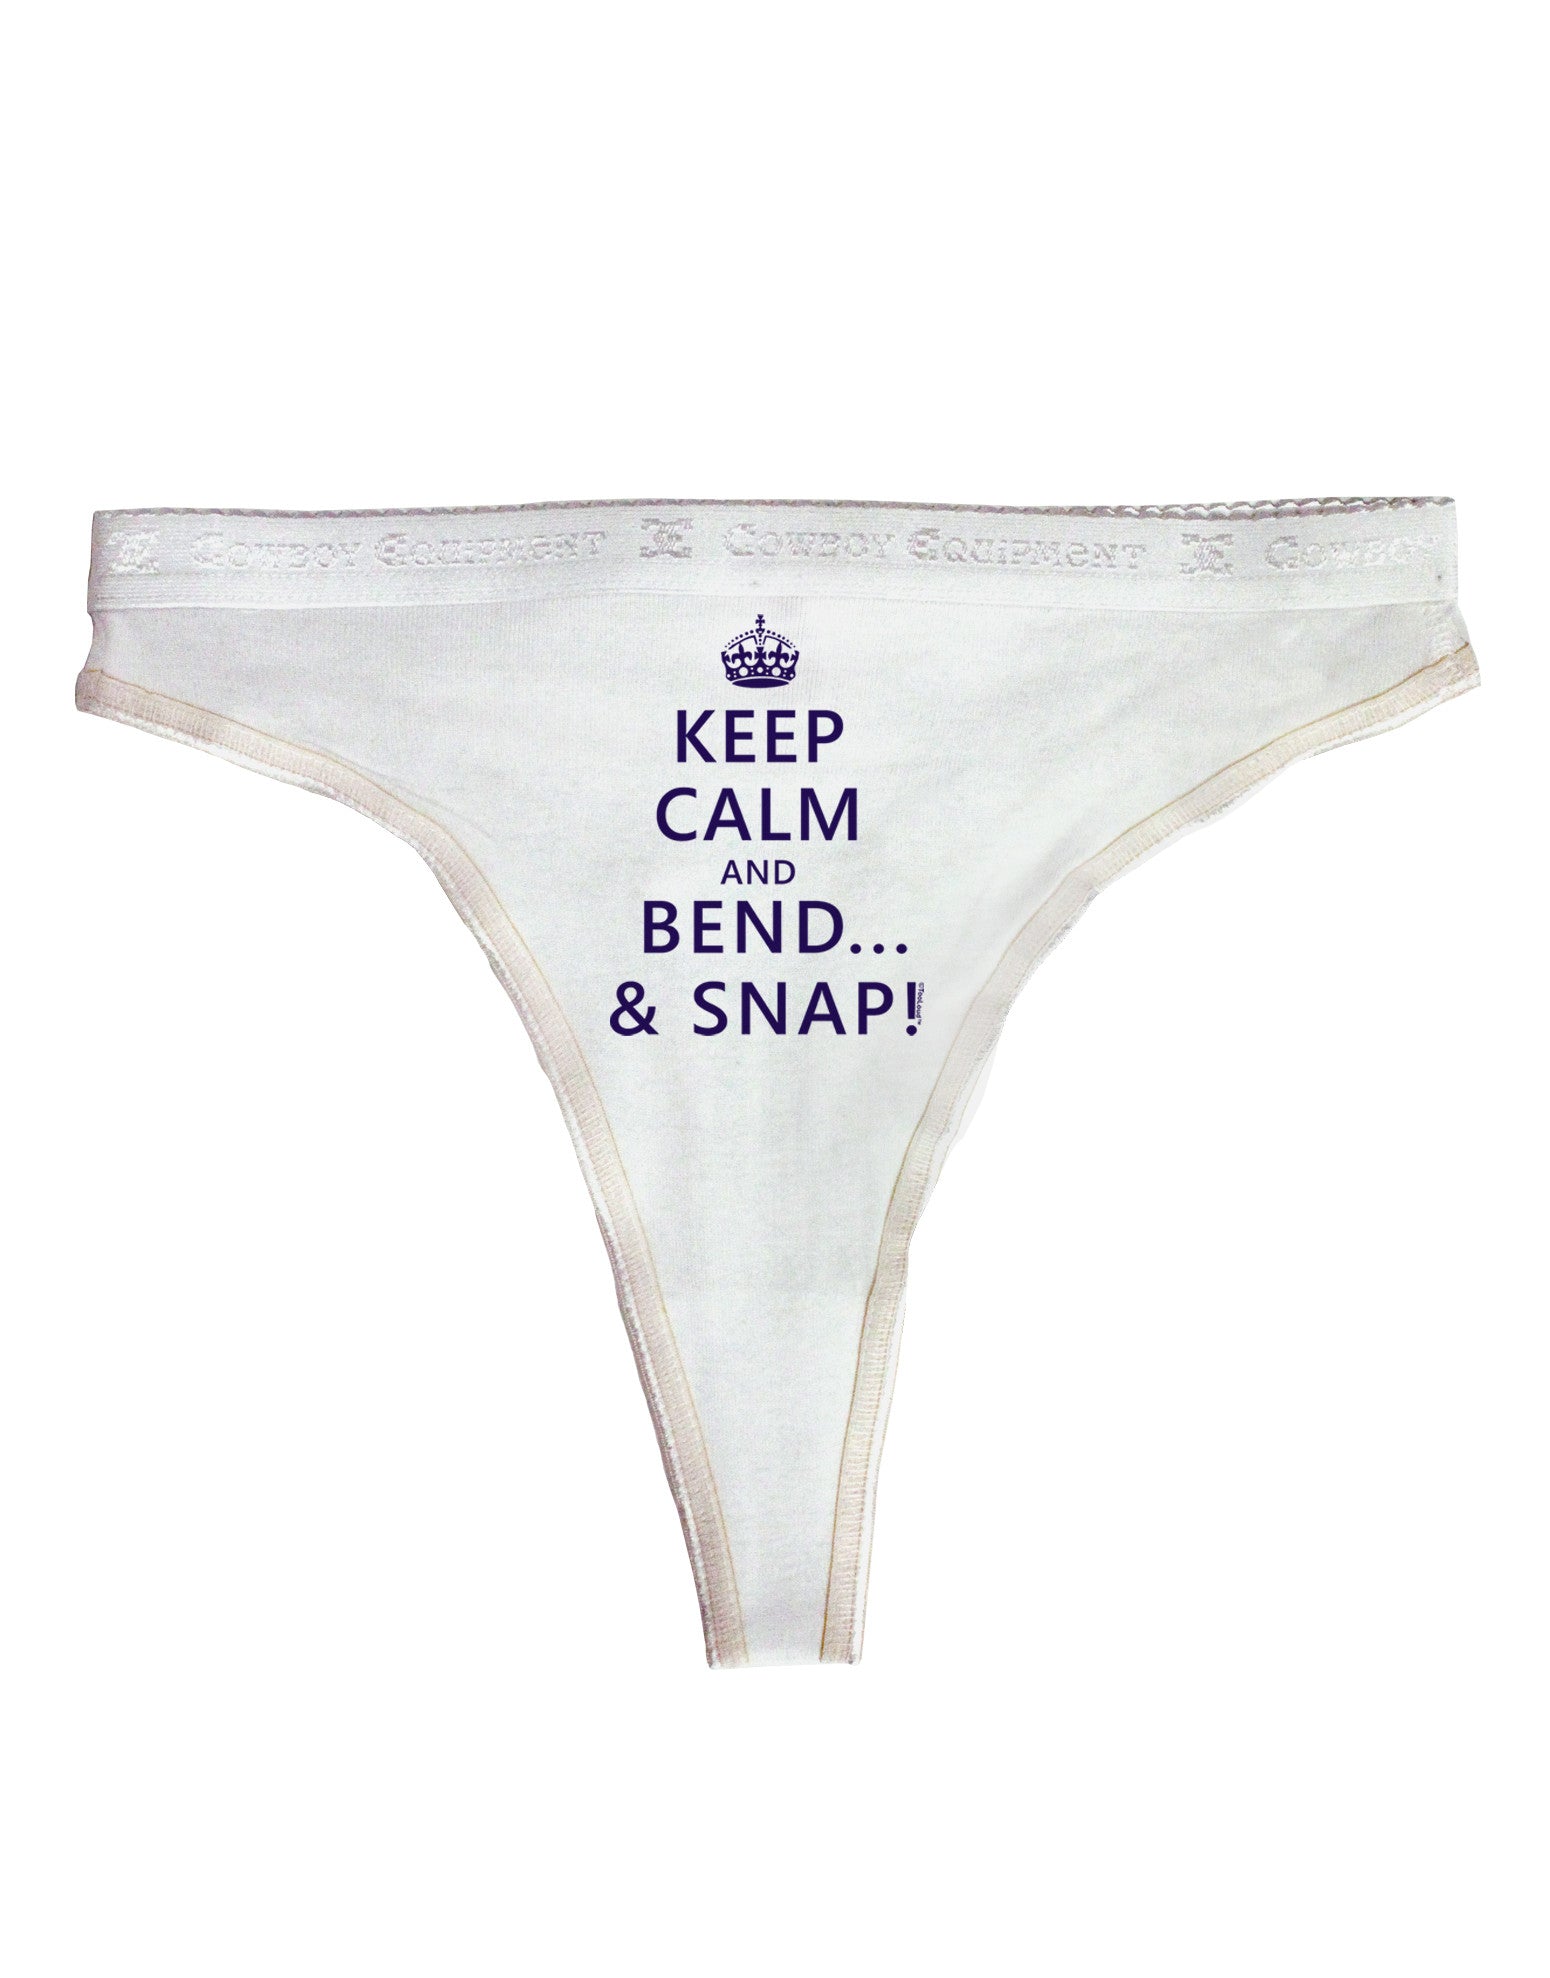 Buy Snappy Panty for Women, Printed Panties for Women's